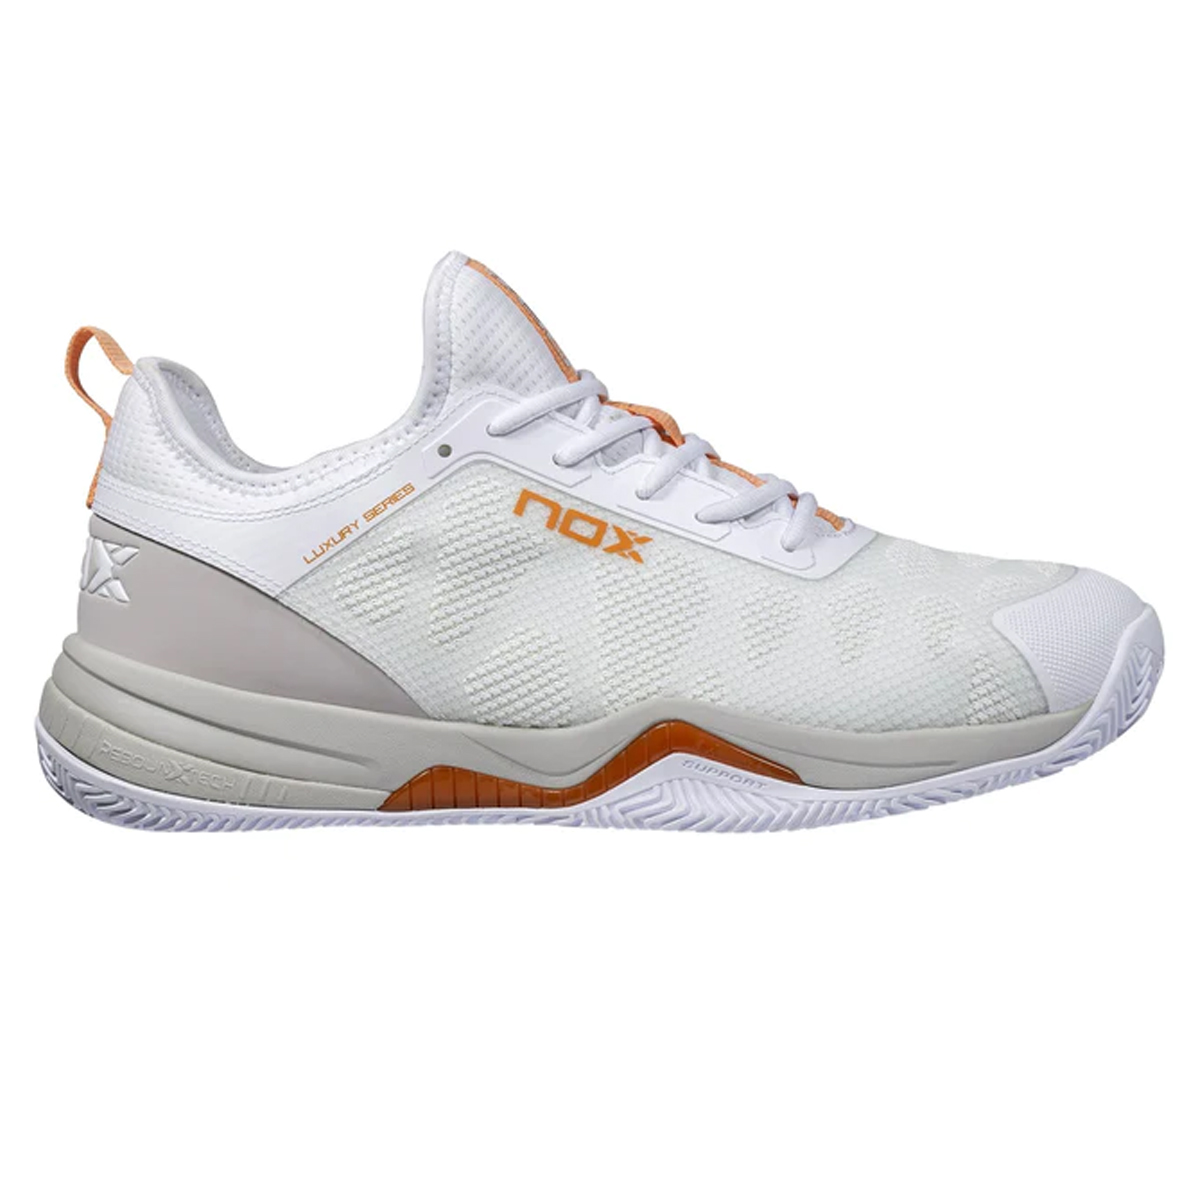 Nox Shoes Lux Nerbo - White/Coral Gold - Padel Life